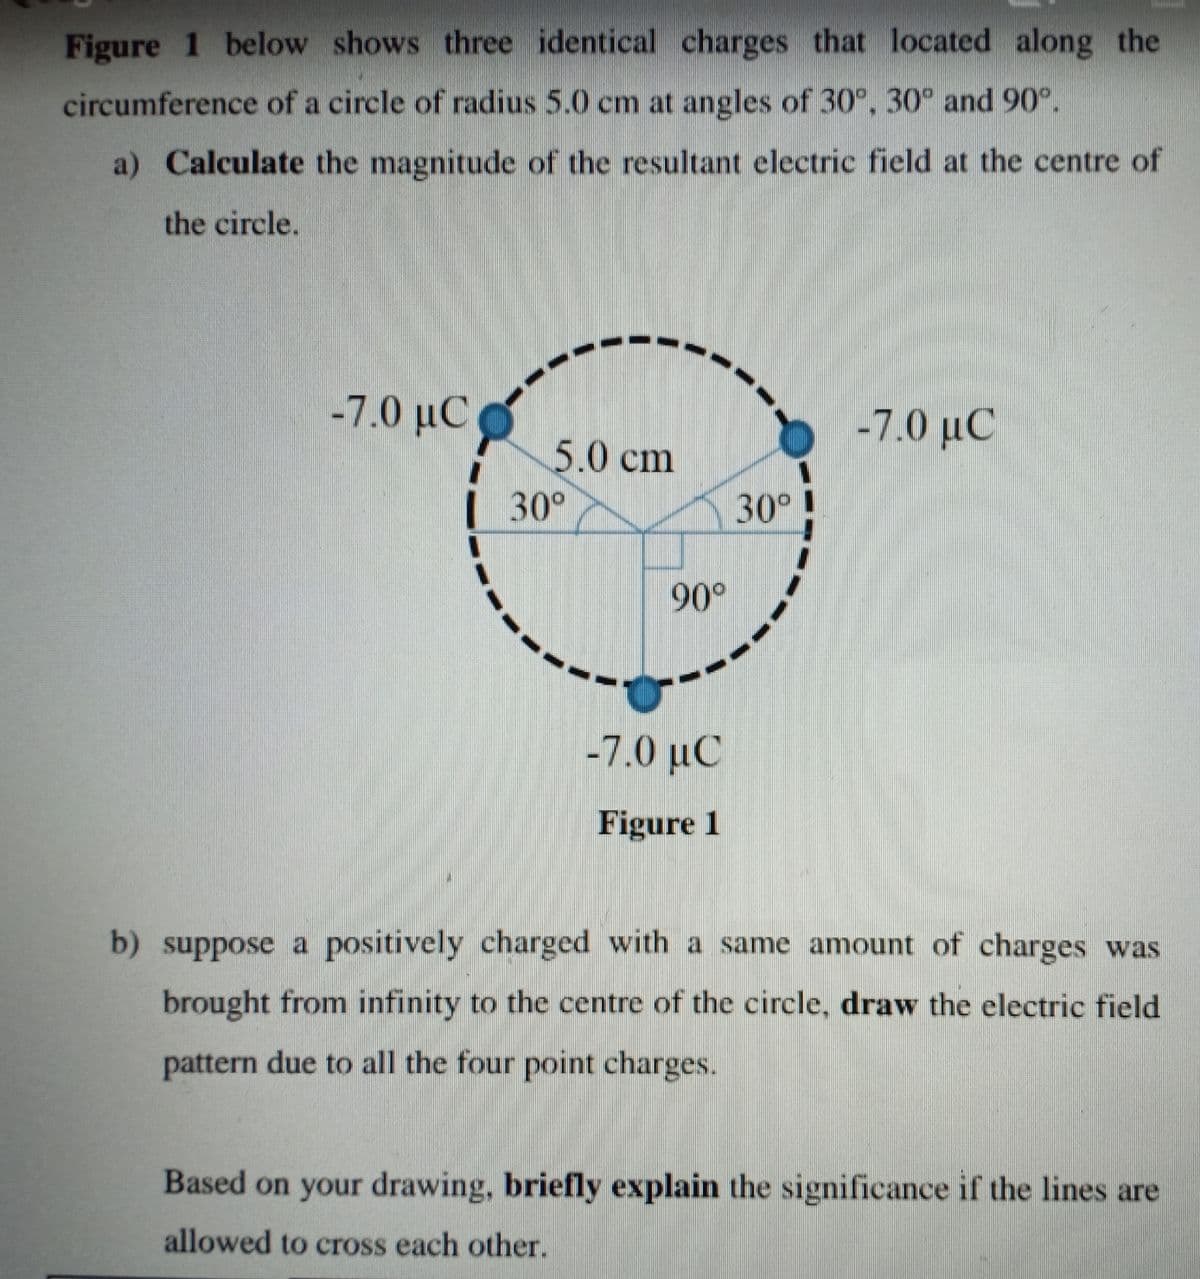 Figure 1 below shows three identical charges that located along the
circumference of a circle of radius 5.0 cm at angles of 30°, 30° and 90°.
a) Calculate the magnitude of the resultant electric field at the centre of
the circle.
-7.0 µC
-7.0 µC
5.0 cm
| 30°
30°
90°
-7.0 μC
Figure 1
b) suppose a positively charged with a same amount of charges was
brought from infinity to the centre of the circle, draw the electric field
pattern due to all the four point charges.
Based on your drawing, briefly explain the significance if the lines are
allowed to cross each other.
